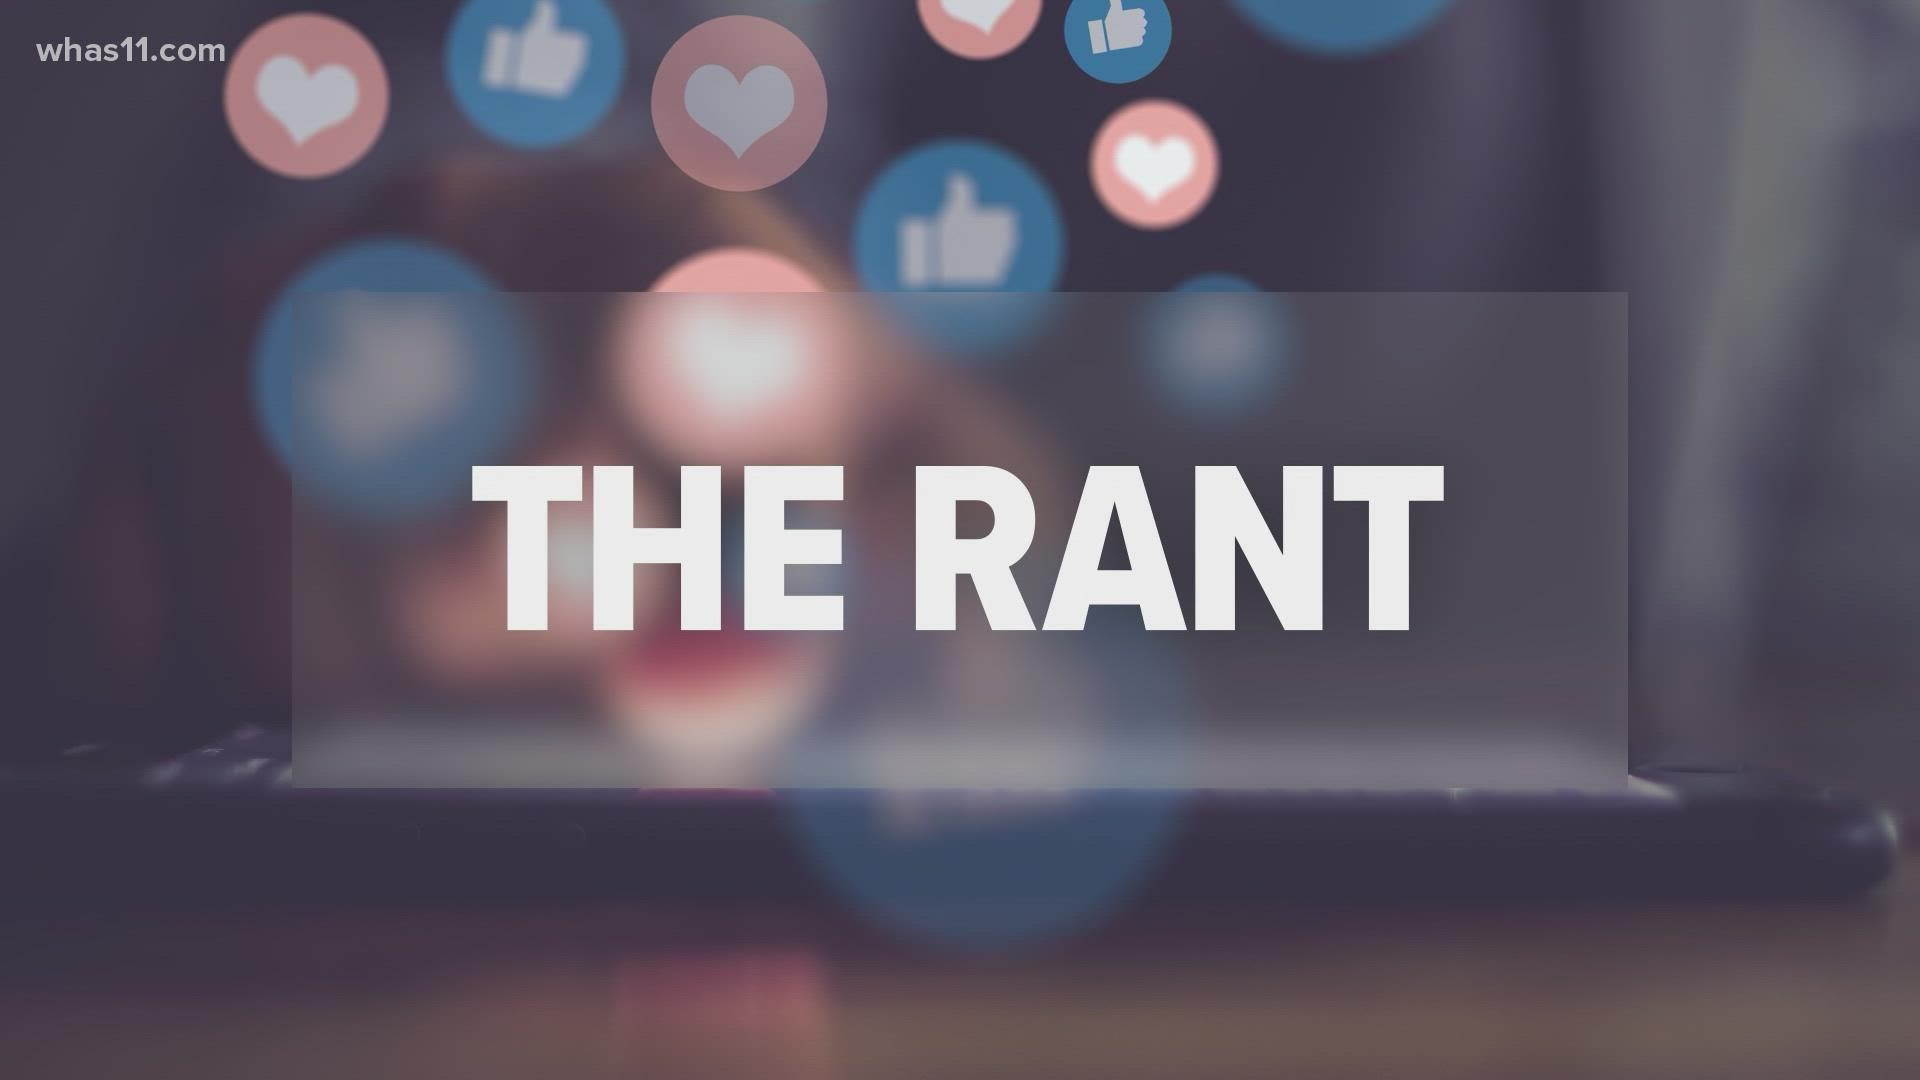 Today, hot topics on the Rant include mask-wearing as optional, gas prices, Ukraine, and snow.